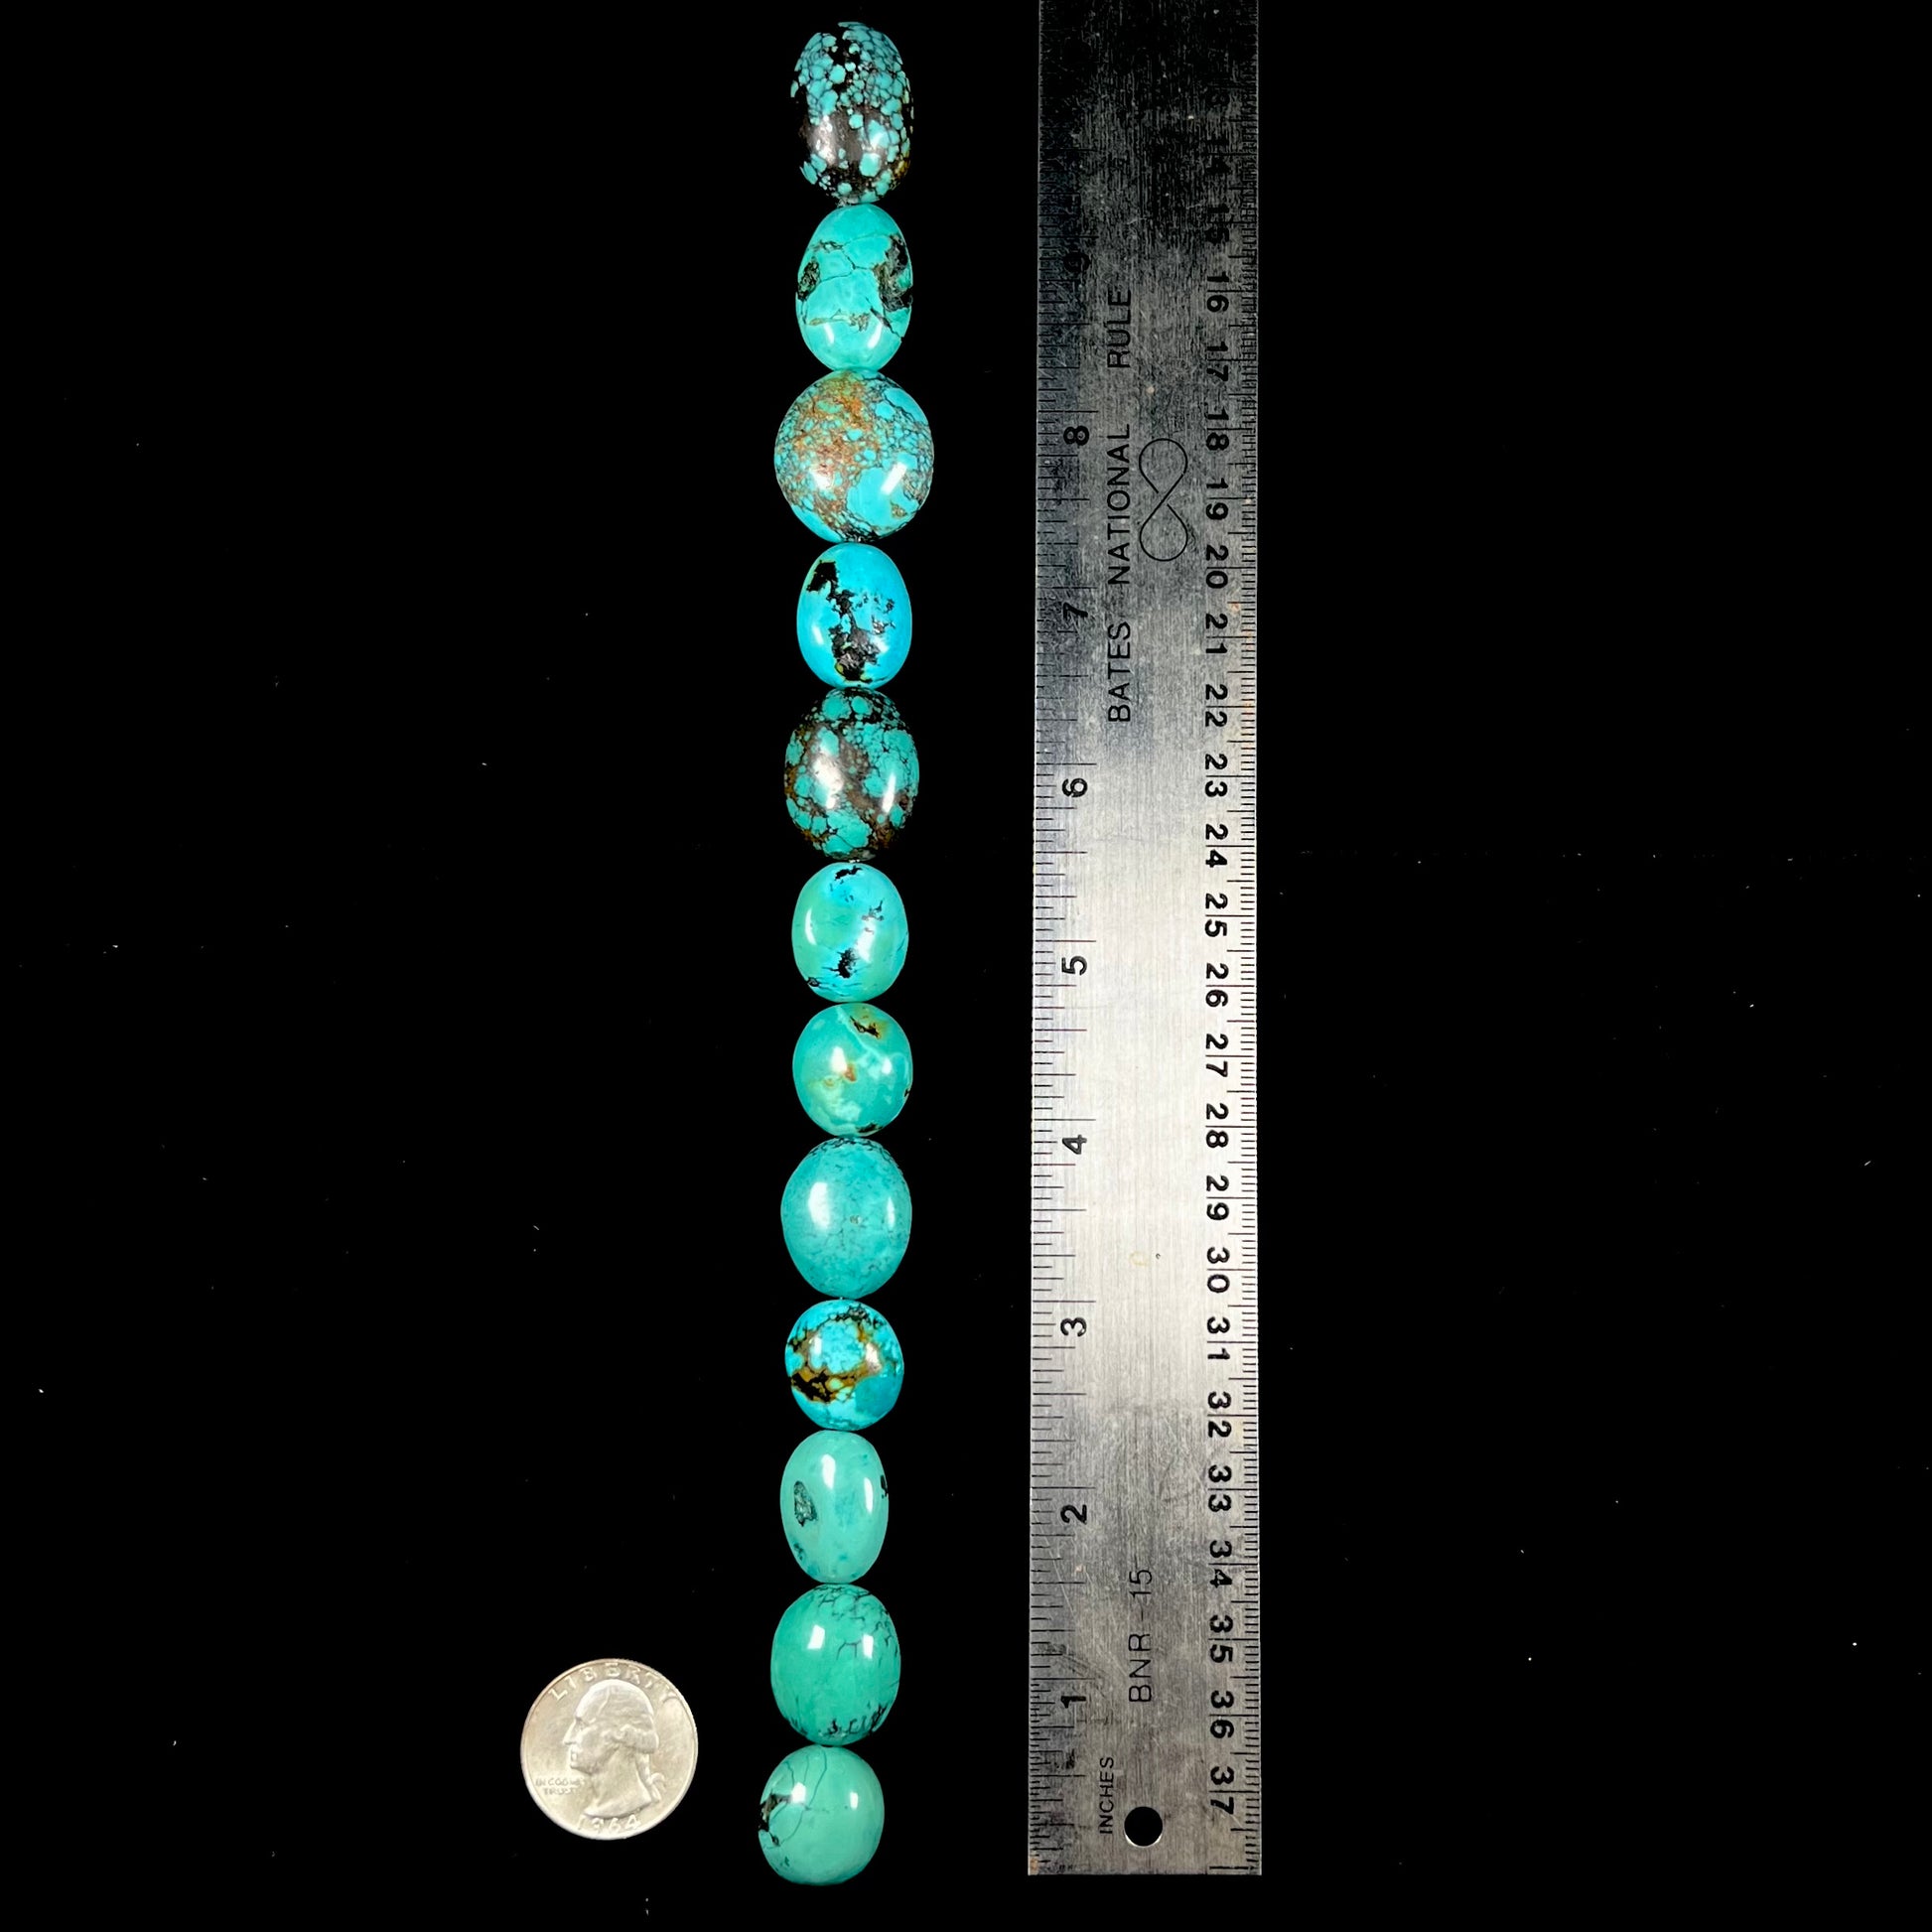 A strand of 12 large, dyed turquoise stones.